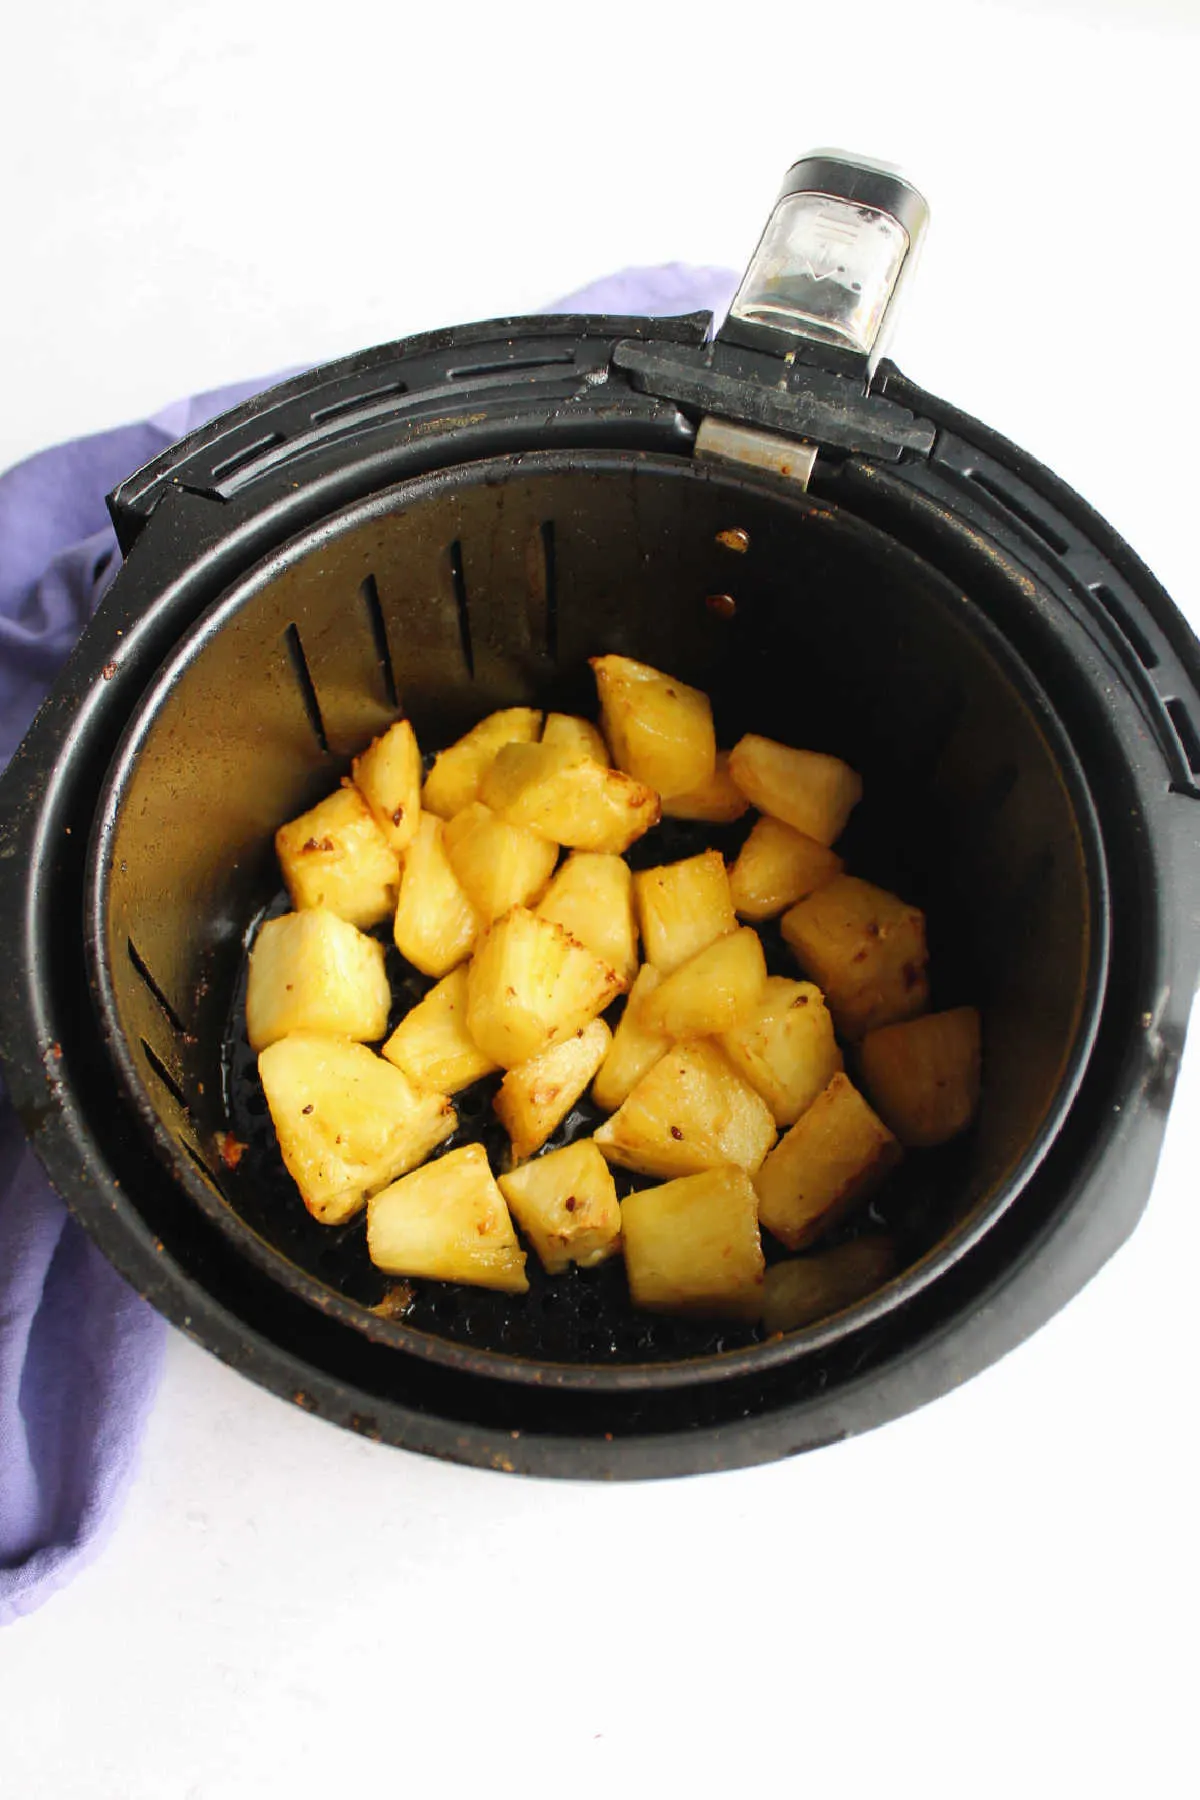 Pineapple chunks in air fryer basket, ready to go.